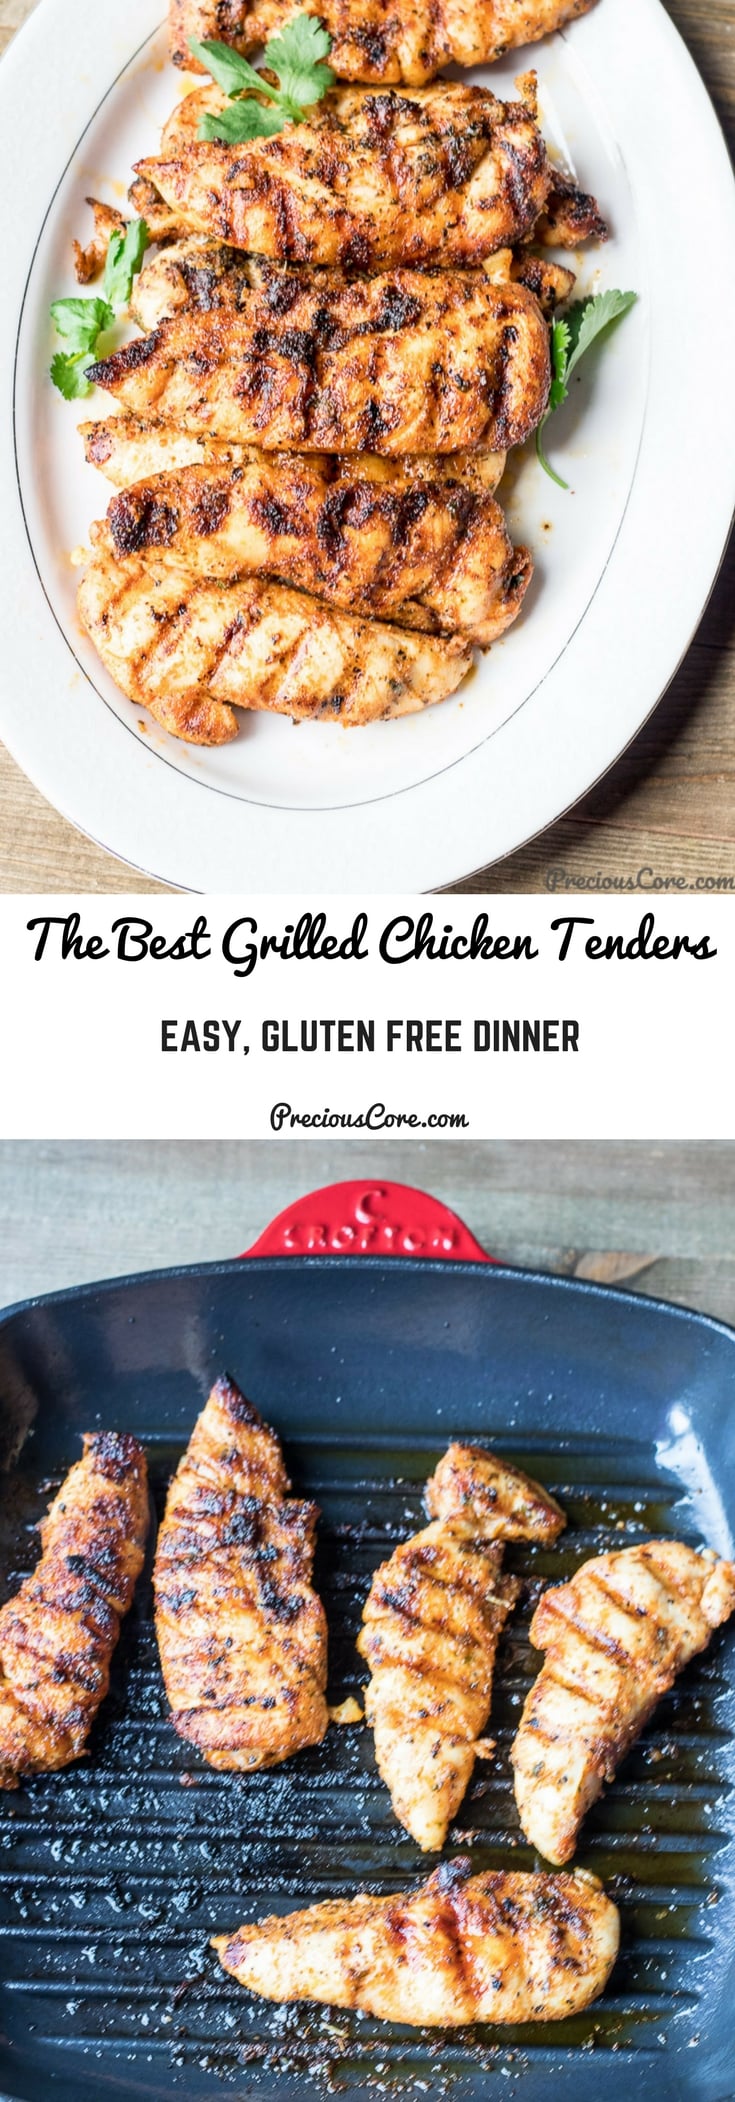 These grilled chicken tenders! They are incredibly tasty and ready in no time! Perfect for those days when you need a quick meal but you do not have loads of time to slave in the kitchen. My kids absolutely adore this and start eating it when it is still hot out of the grill pan. Make this recipe, friends! Get the recipe on Precious Core. #GrilledChicken #SummerRecipes #GlutenFree #Grilling